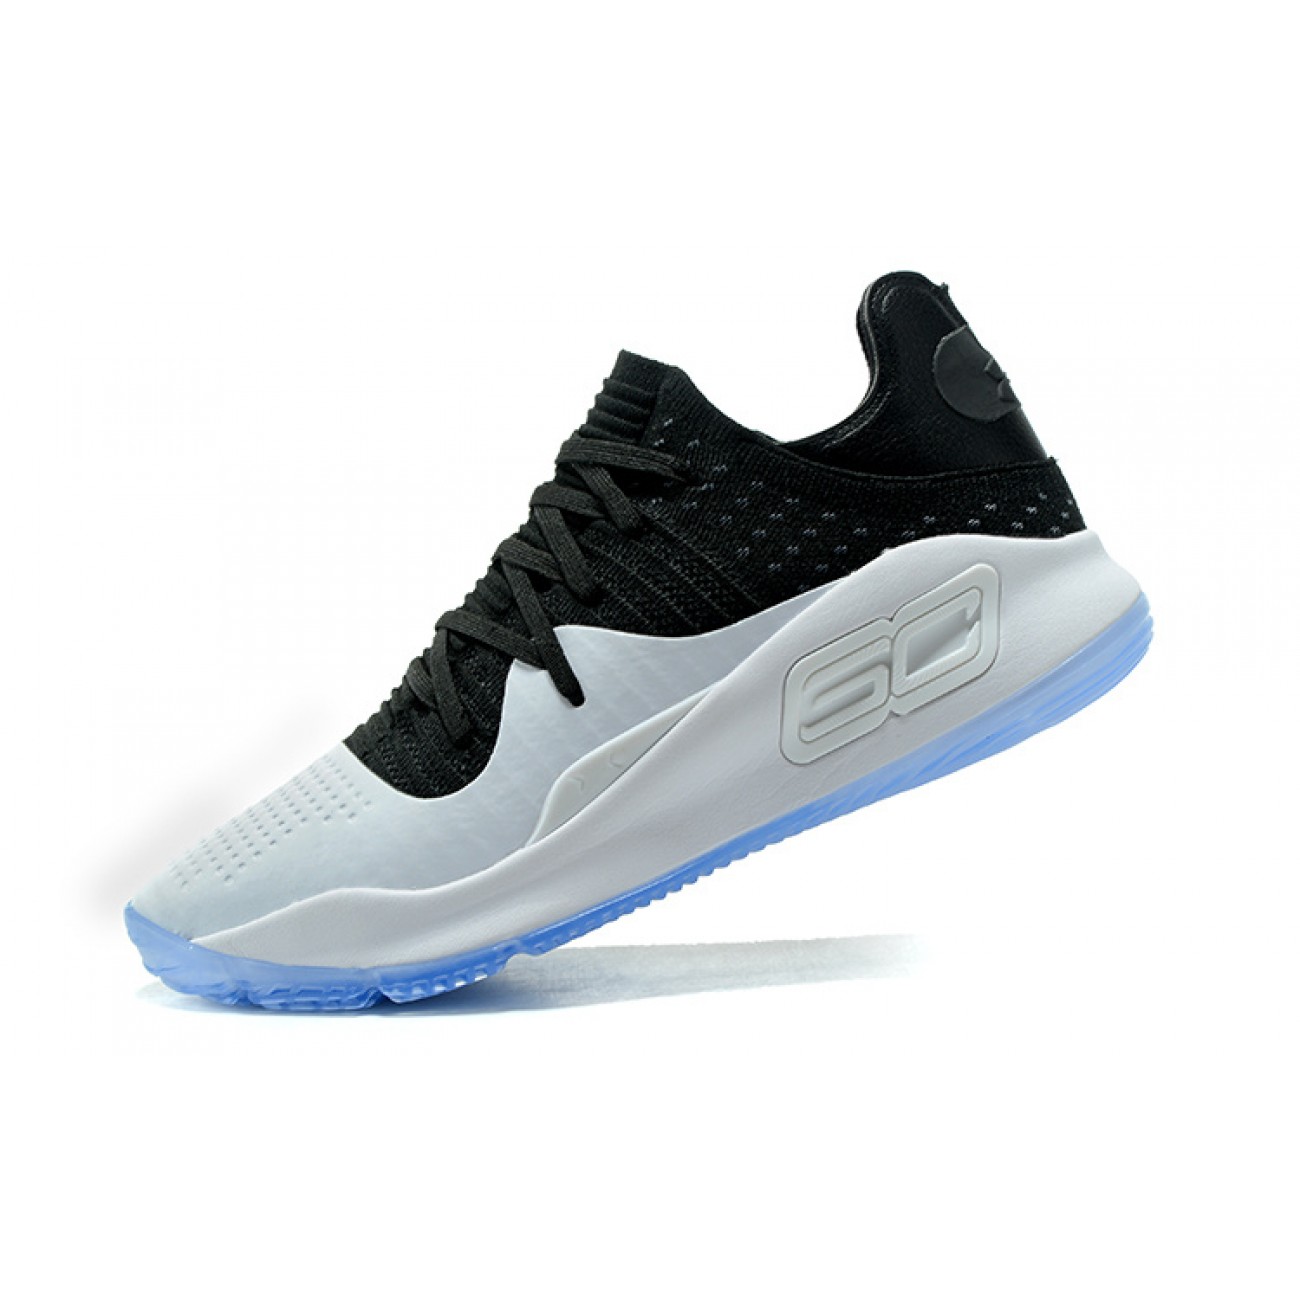 Under Armour UA Curry 4 Low White/Black